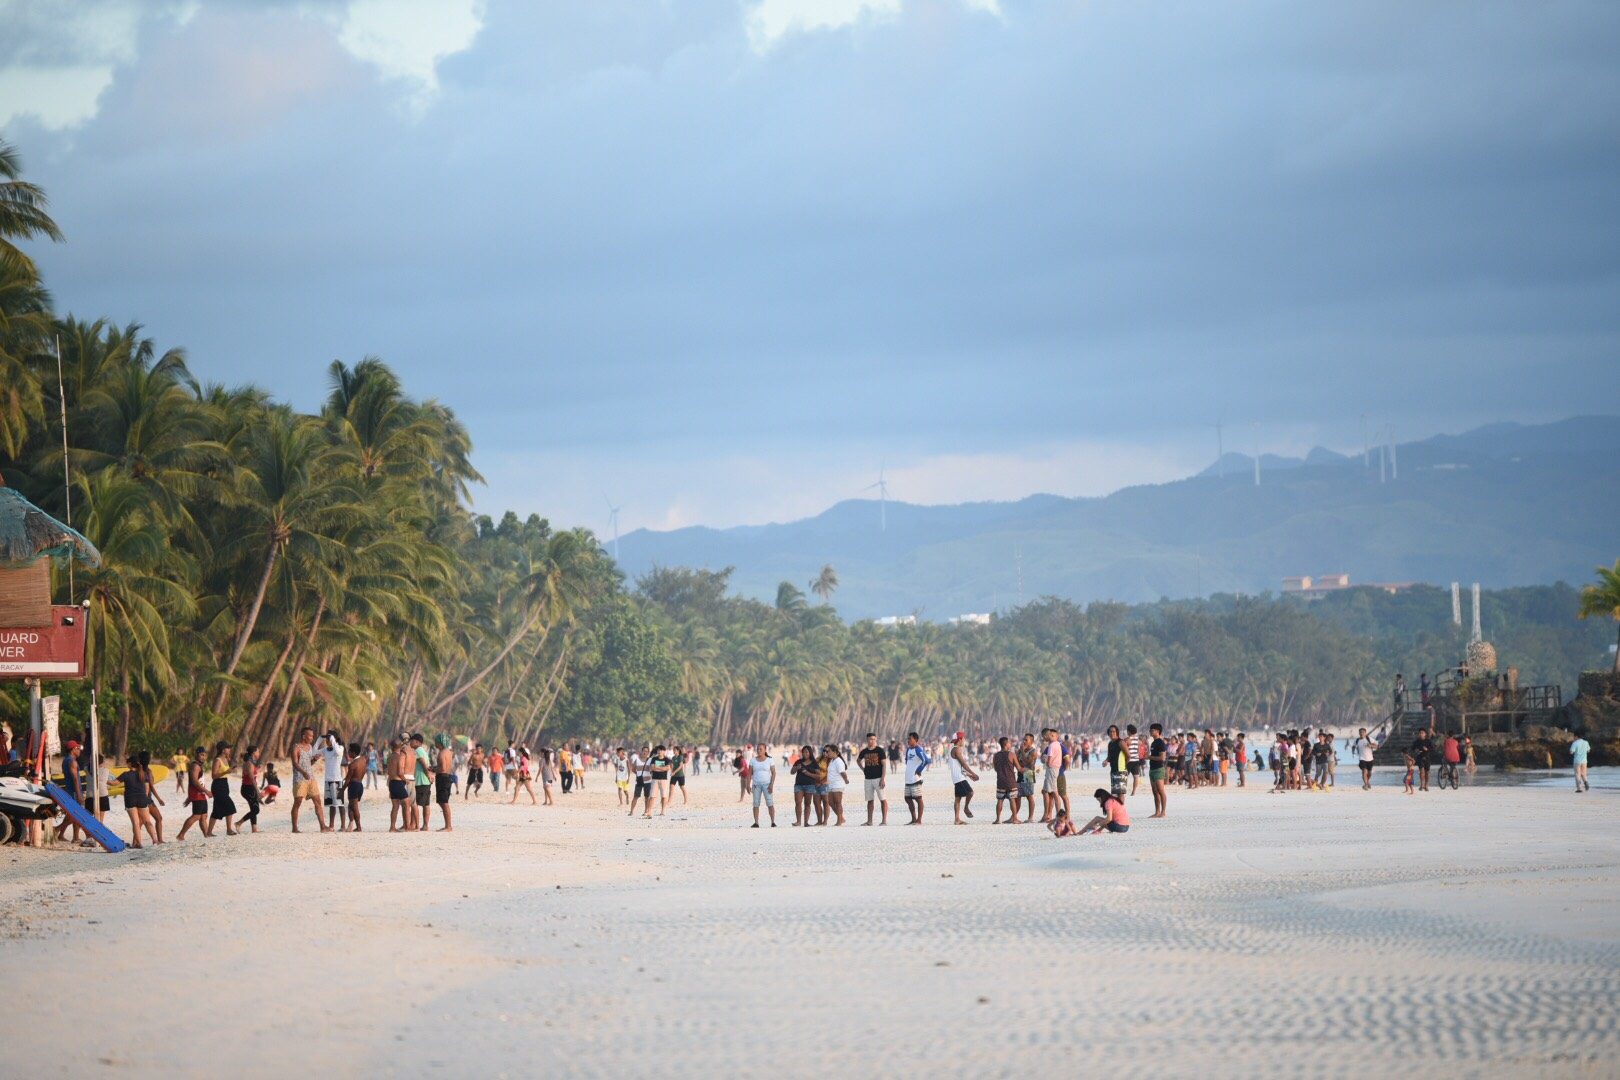 Malay execs urge town council to fast-track relocation site for Boracay vendors